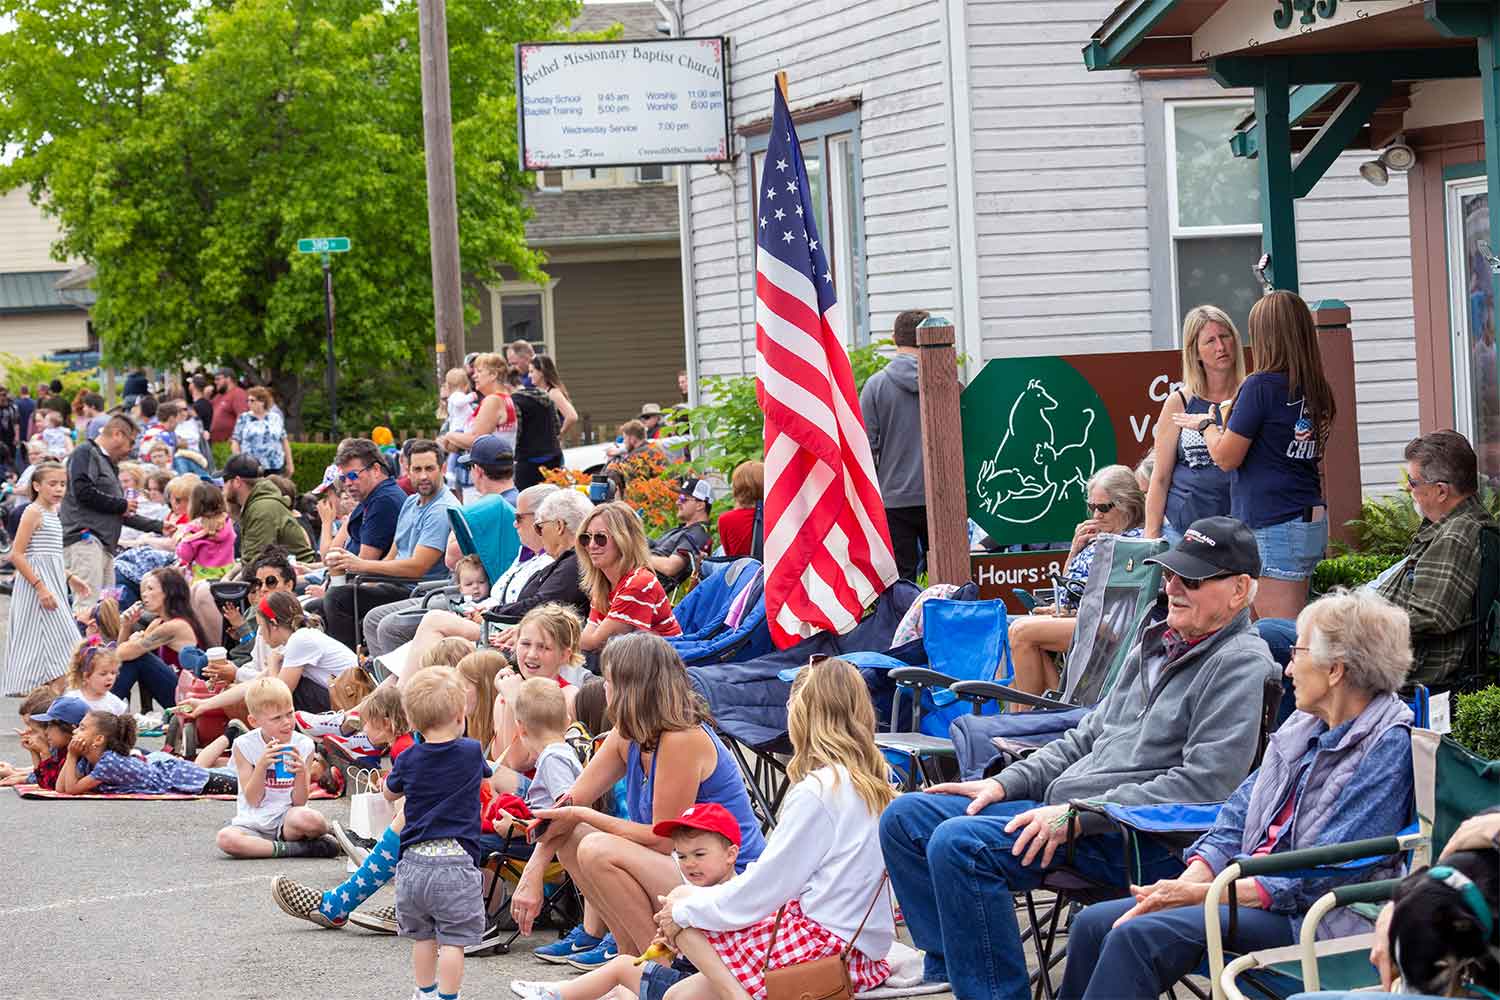 ‘The Place To Be On The 4th Of July’ Eugene Weekly